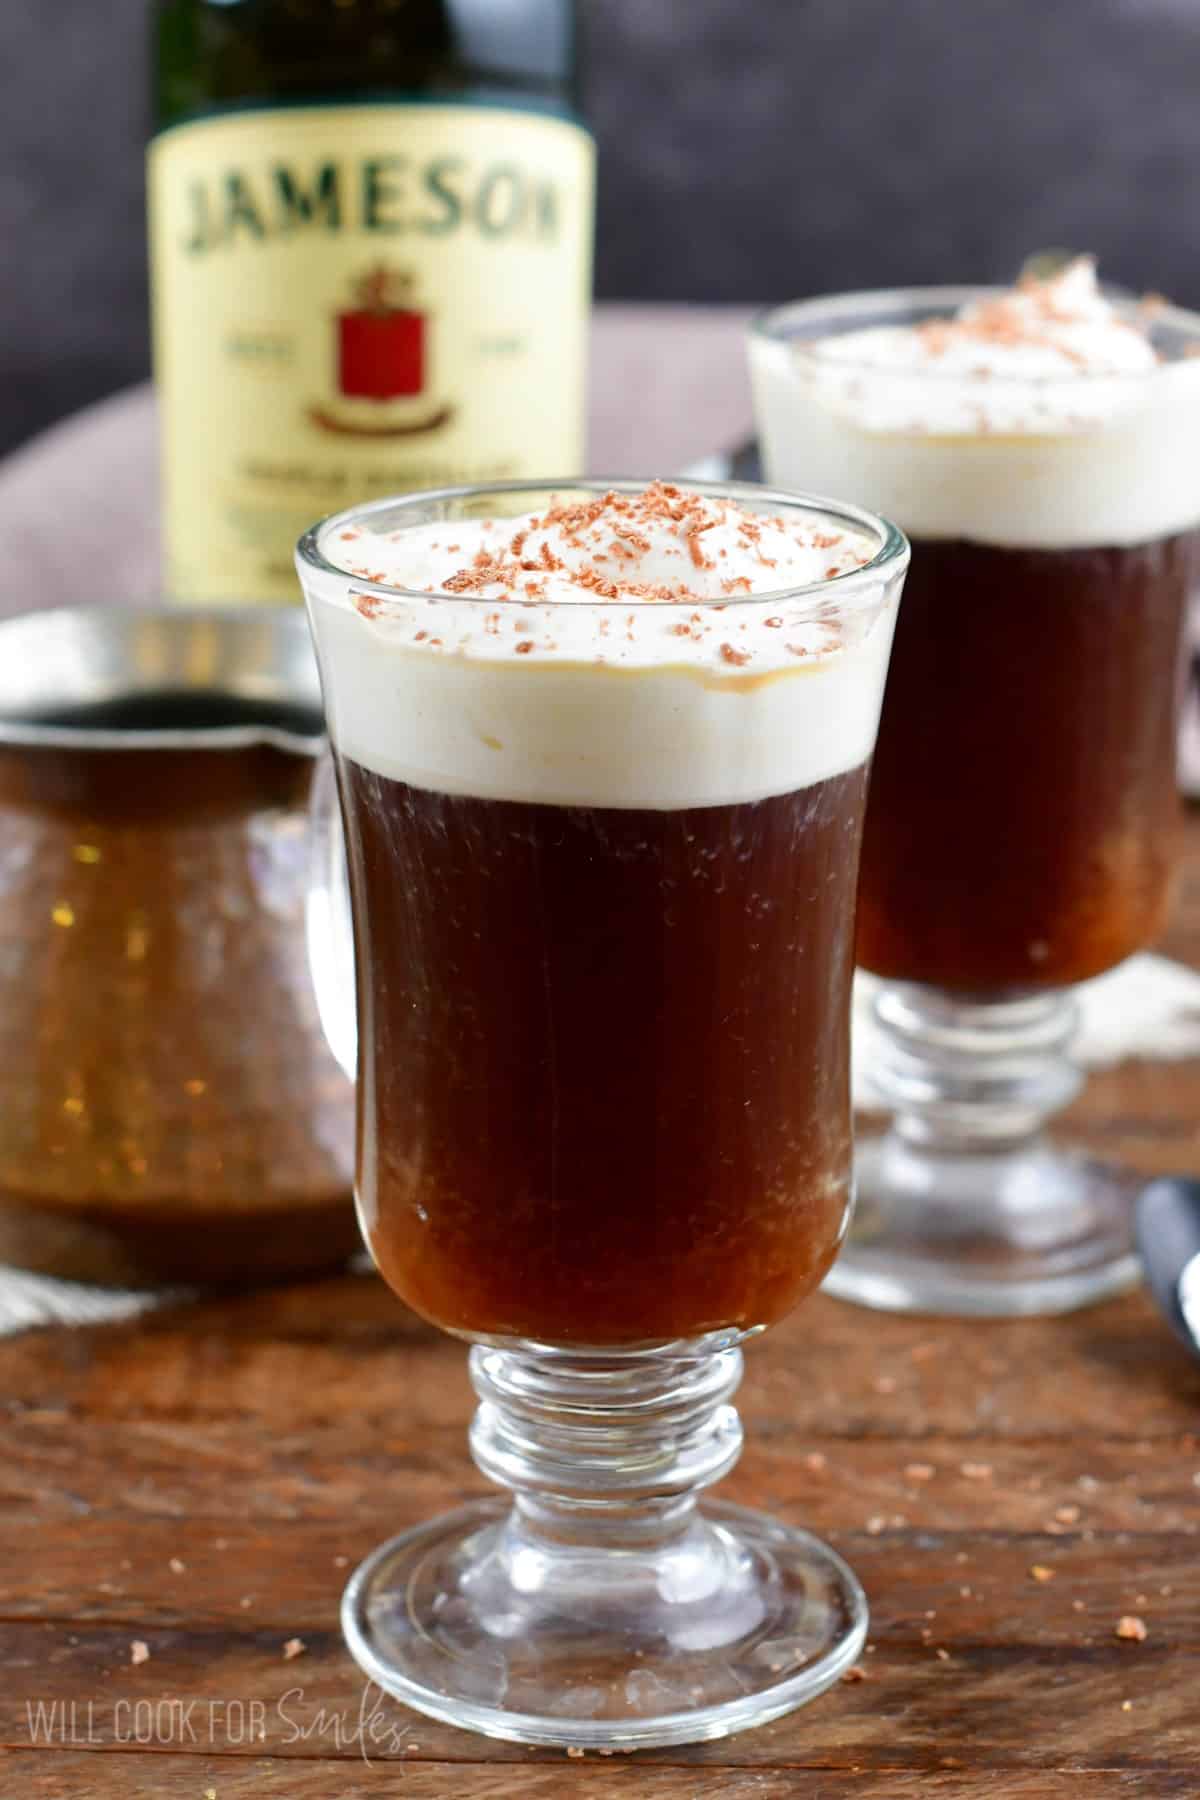 I glass filled with Irish coffee with another glass and a botle of Jameson in the background.